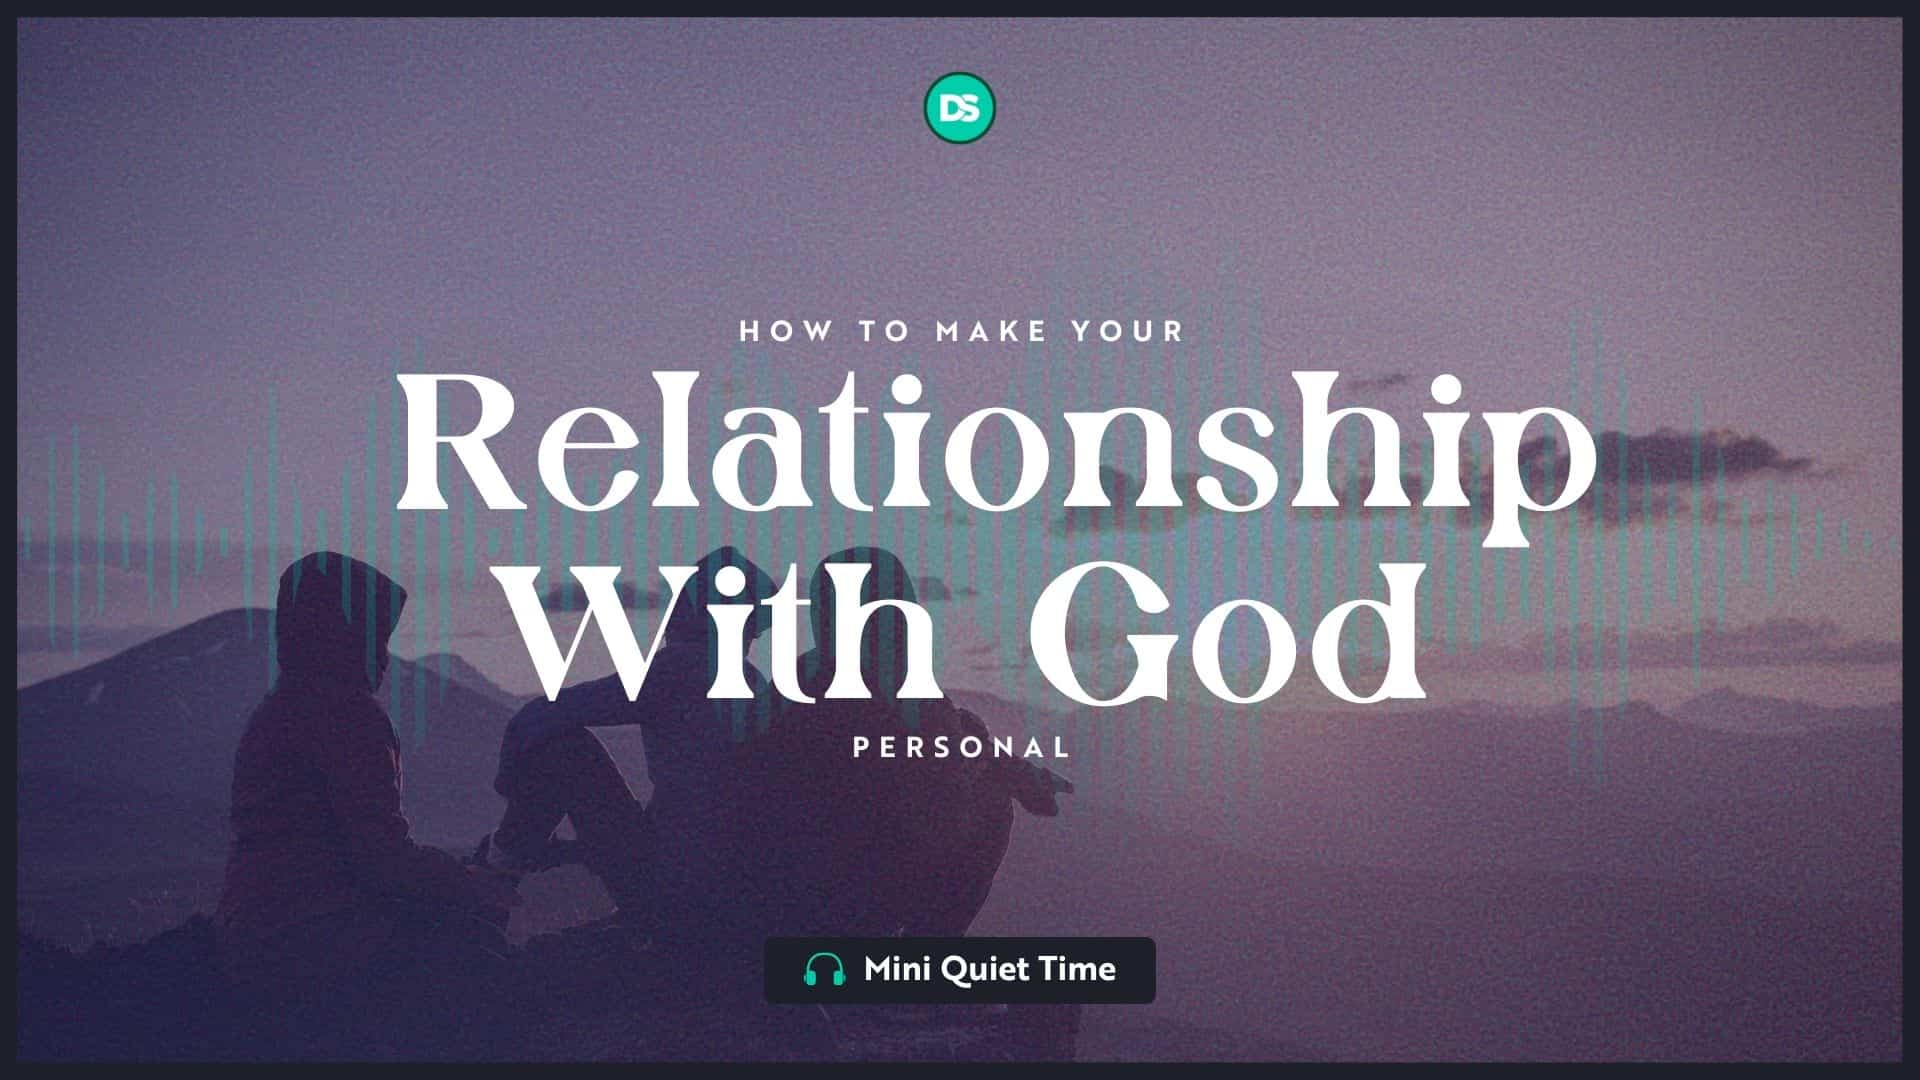 How to Make Your Relationship With God Personal (Mini Quiet Time) 12